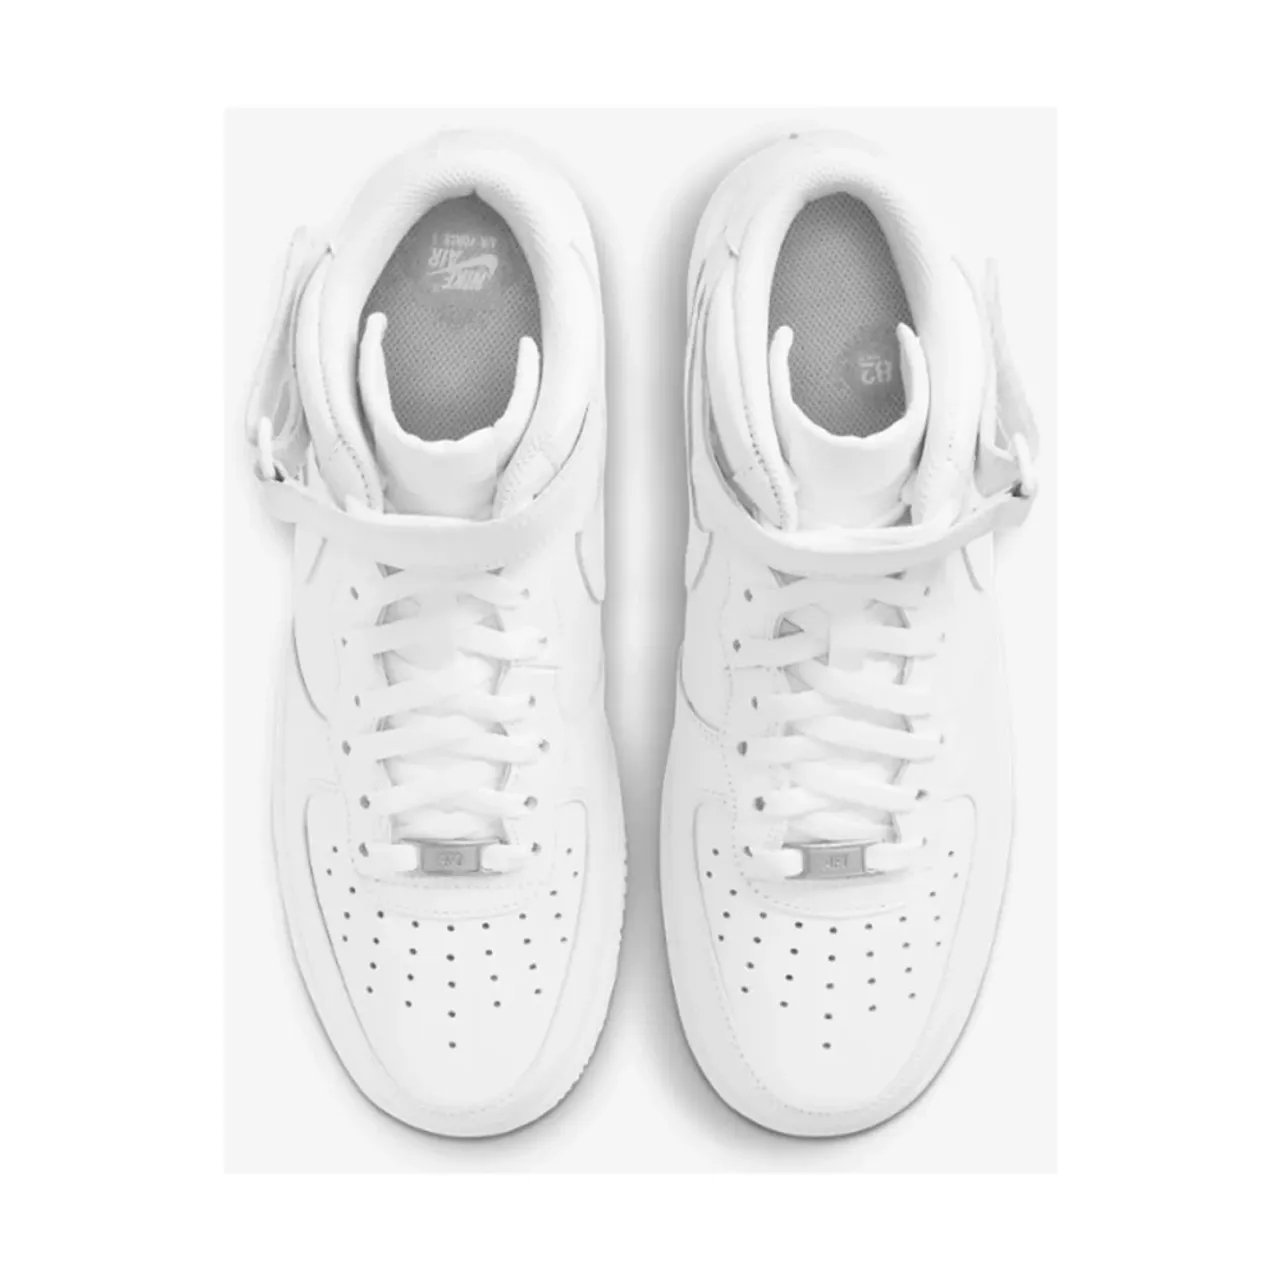 Nike , Legendary AF1 Style Sneakers ,White male, Sizes: